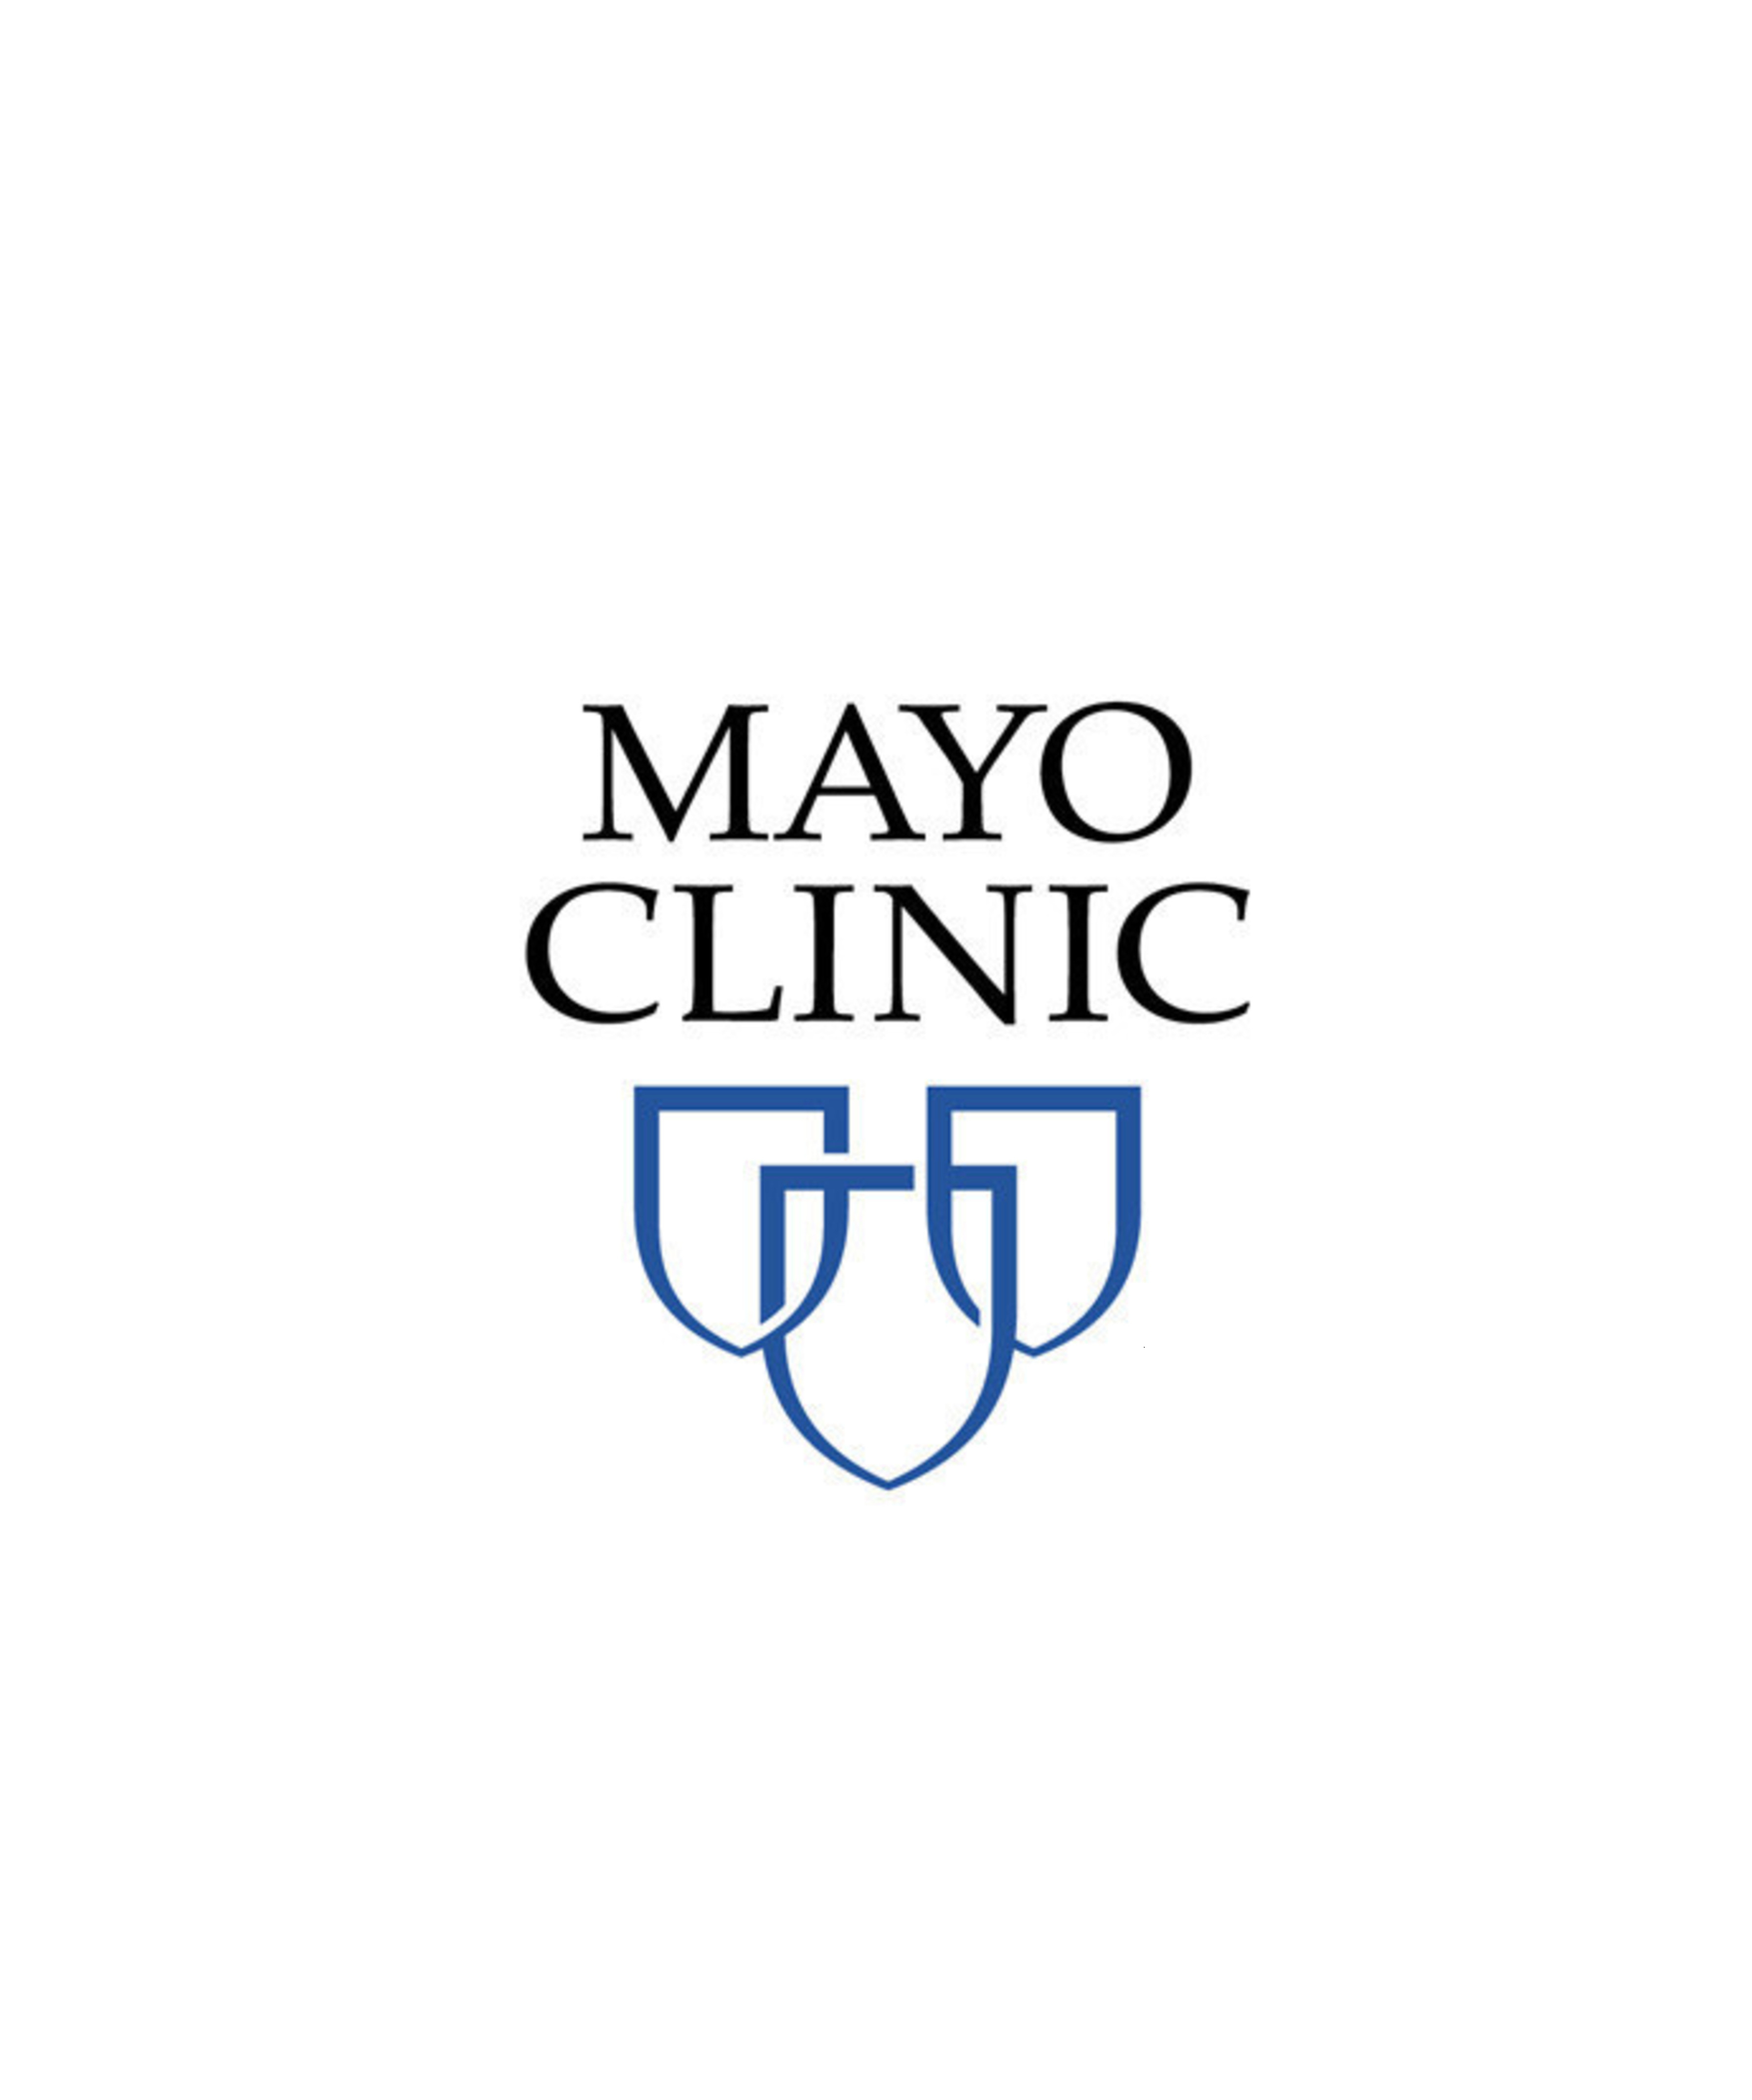 GistMD Enters Know-How Agreement with Mayo Clinic to Develop Next-Generation Patient Engagement Tools